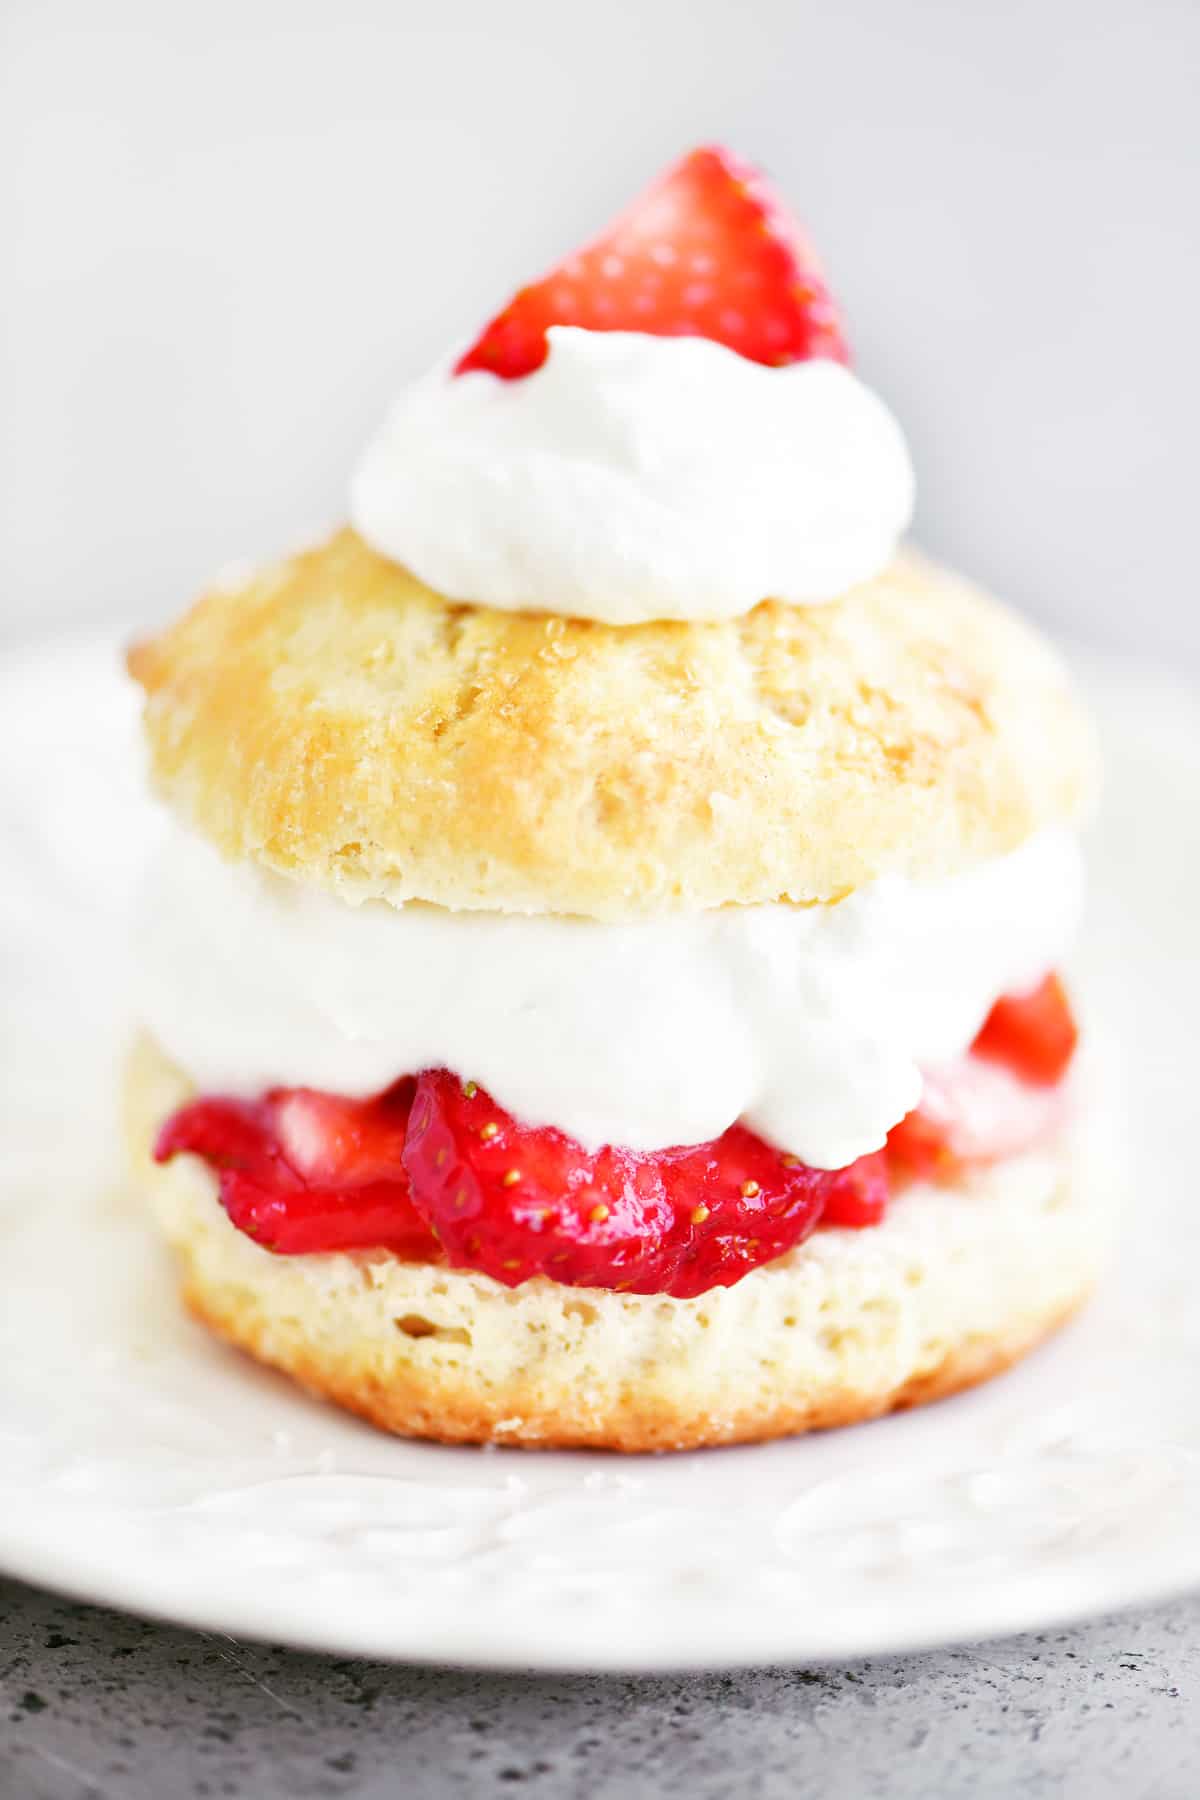 Bisquick strawberry shortcake on a white plate.